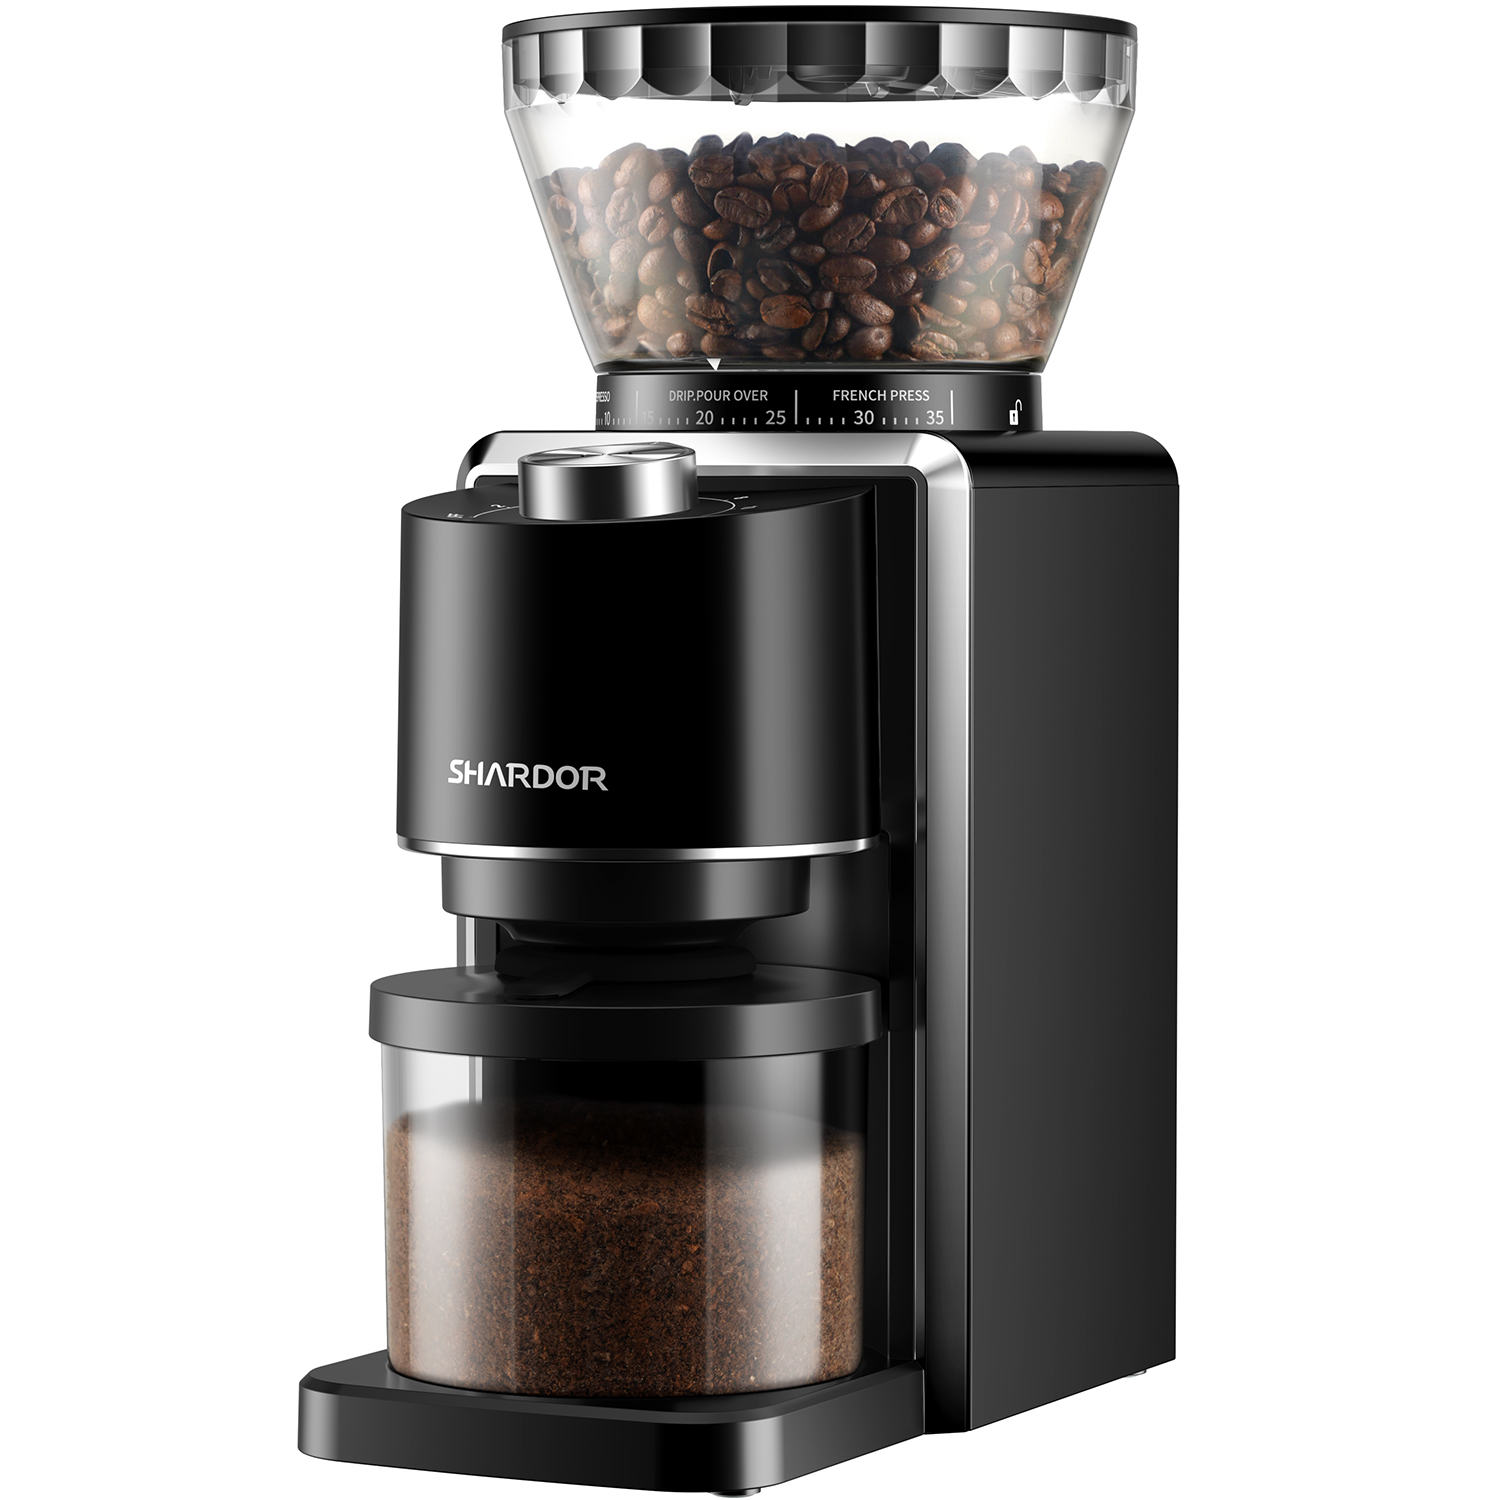 SHARDOR Adjustable Coffee Grinder Electric, Grain mills, Herb, Nut,  Spice,Coffee Bean Espresso Grinder with 2 Removable Stainless Steel Bowl,  Silver